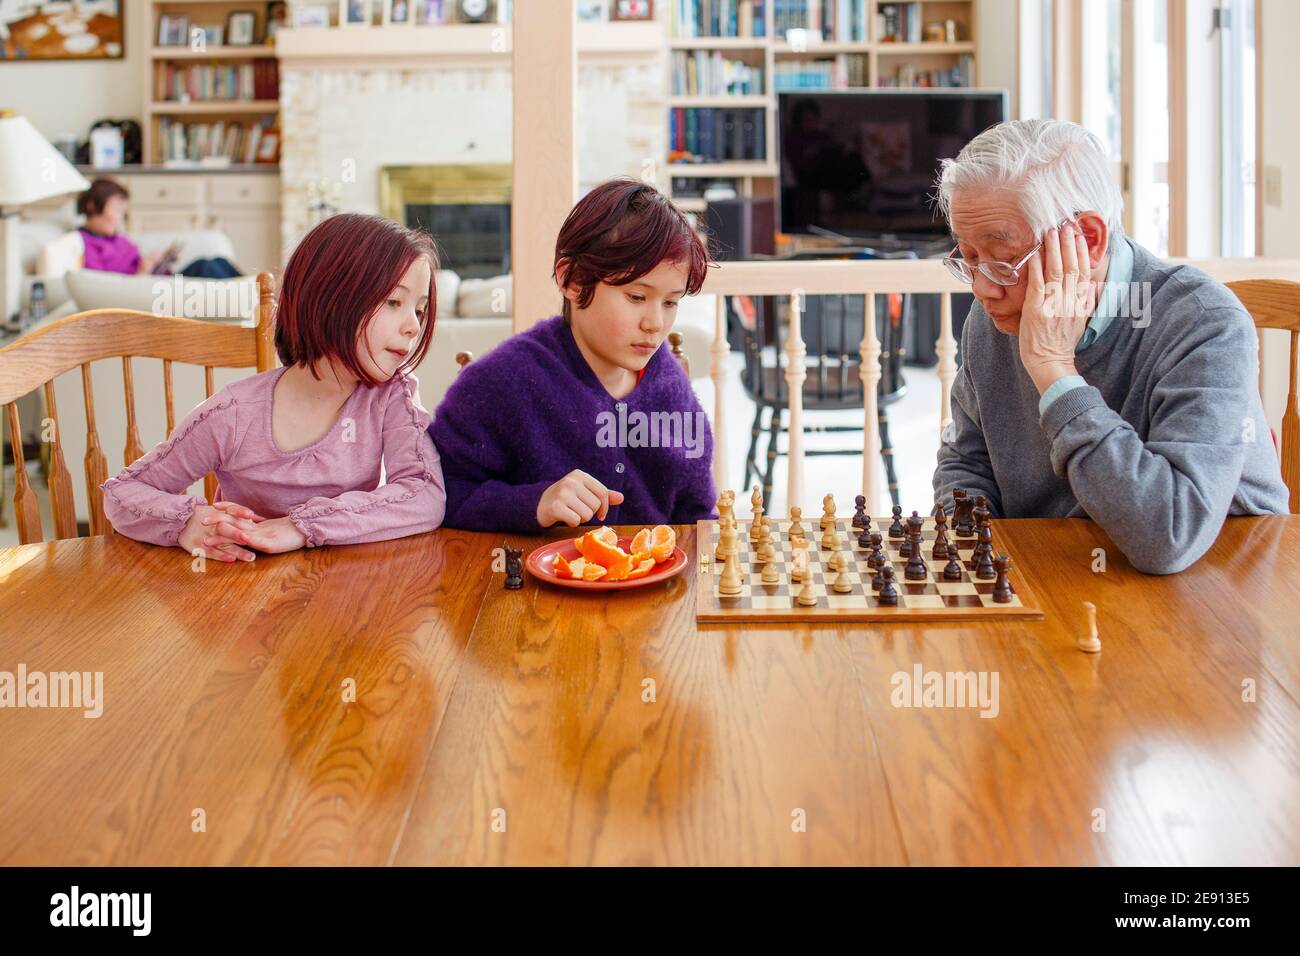 Two children play chess with grandfather and woman reads in background Stock Photo